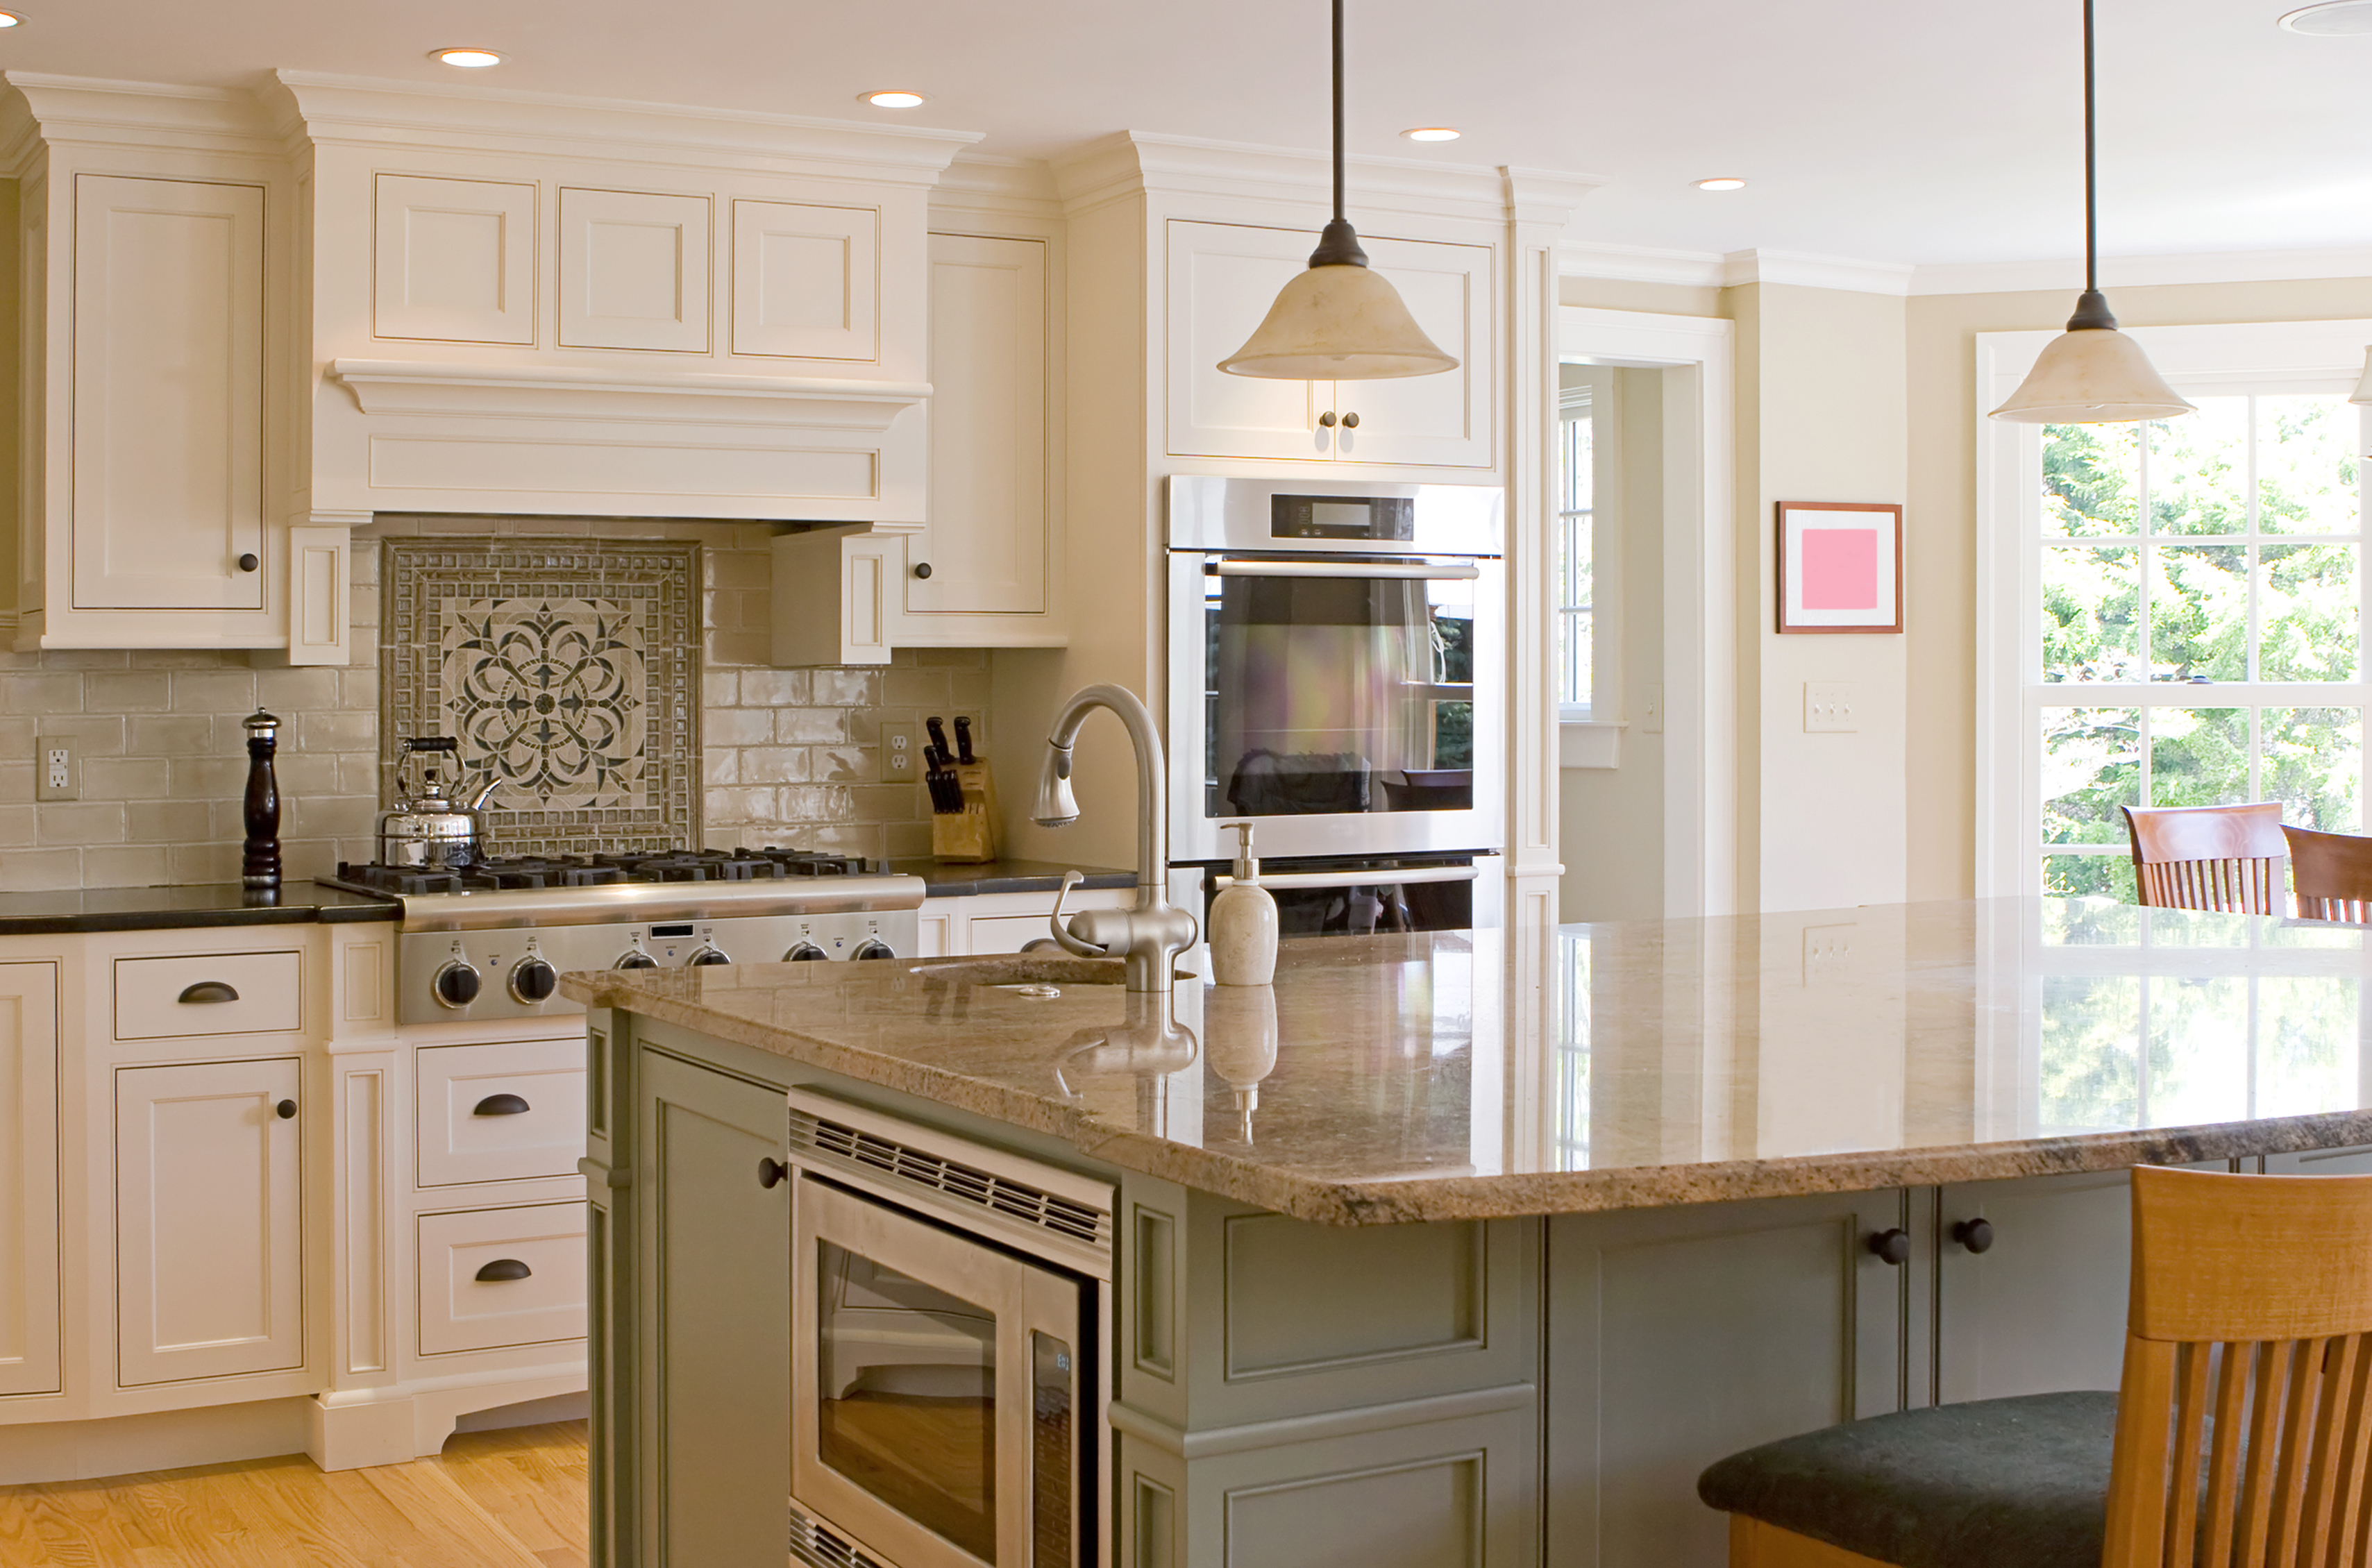 4 Reasons to Remodel Your Kitchen